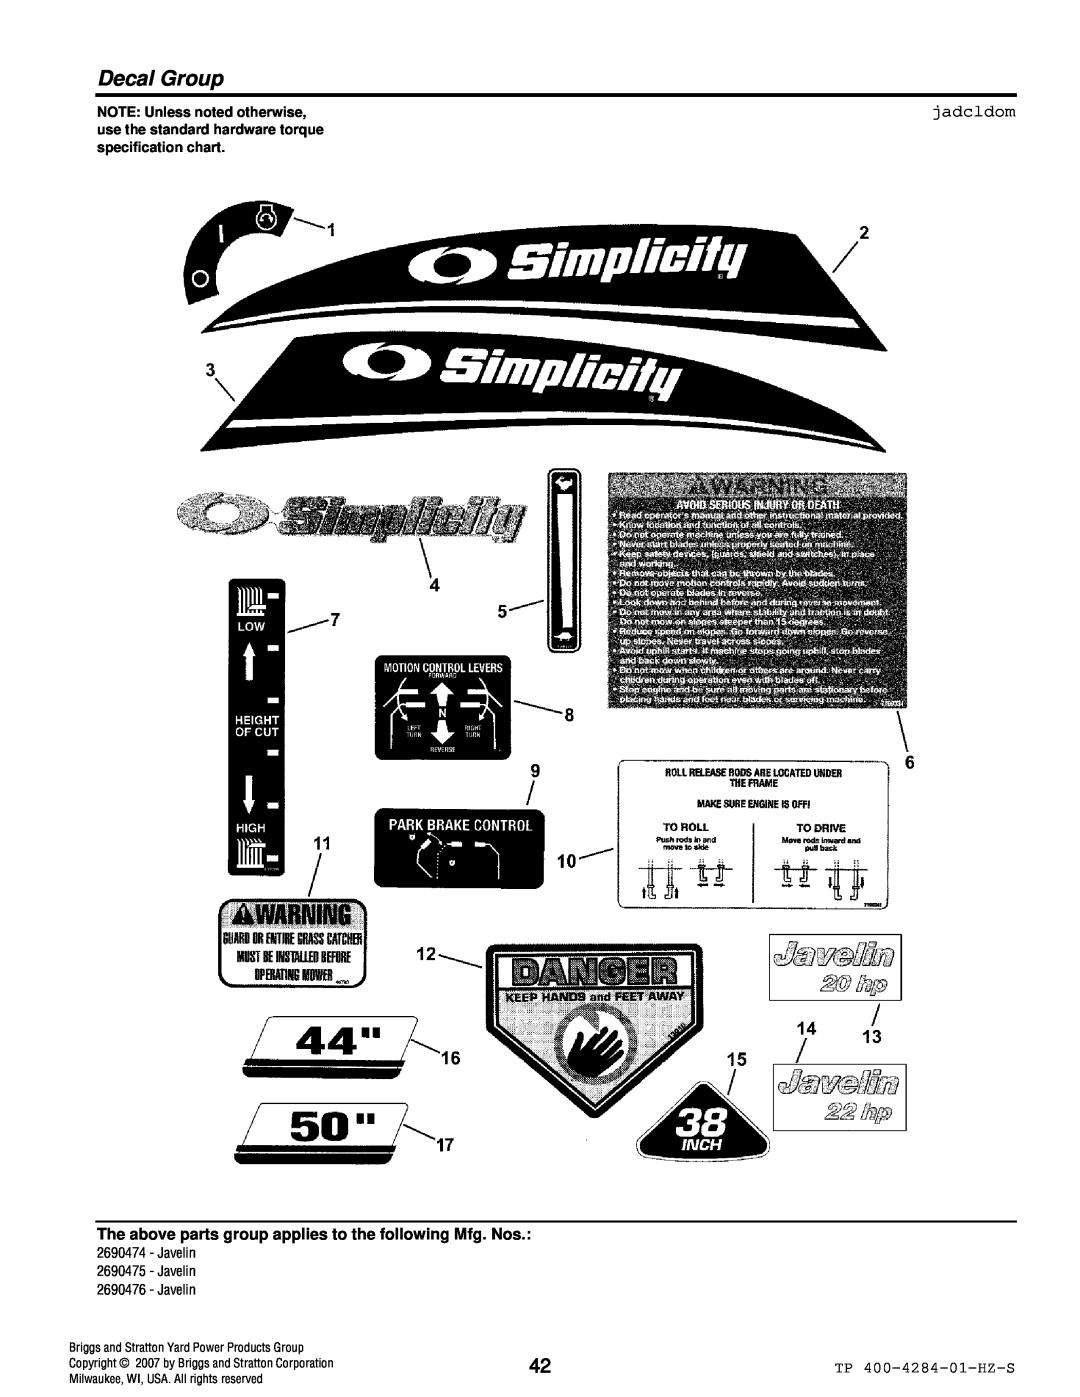 Simplicity TP 400-4284-01-HZ-S manual Decal Group, jadcldom, NOTE: Unless noted otherwise, use the standard hardware torque 